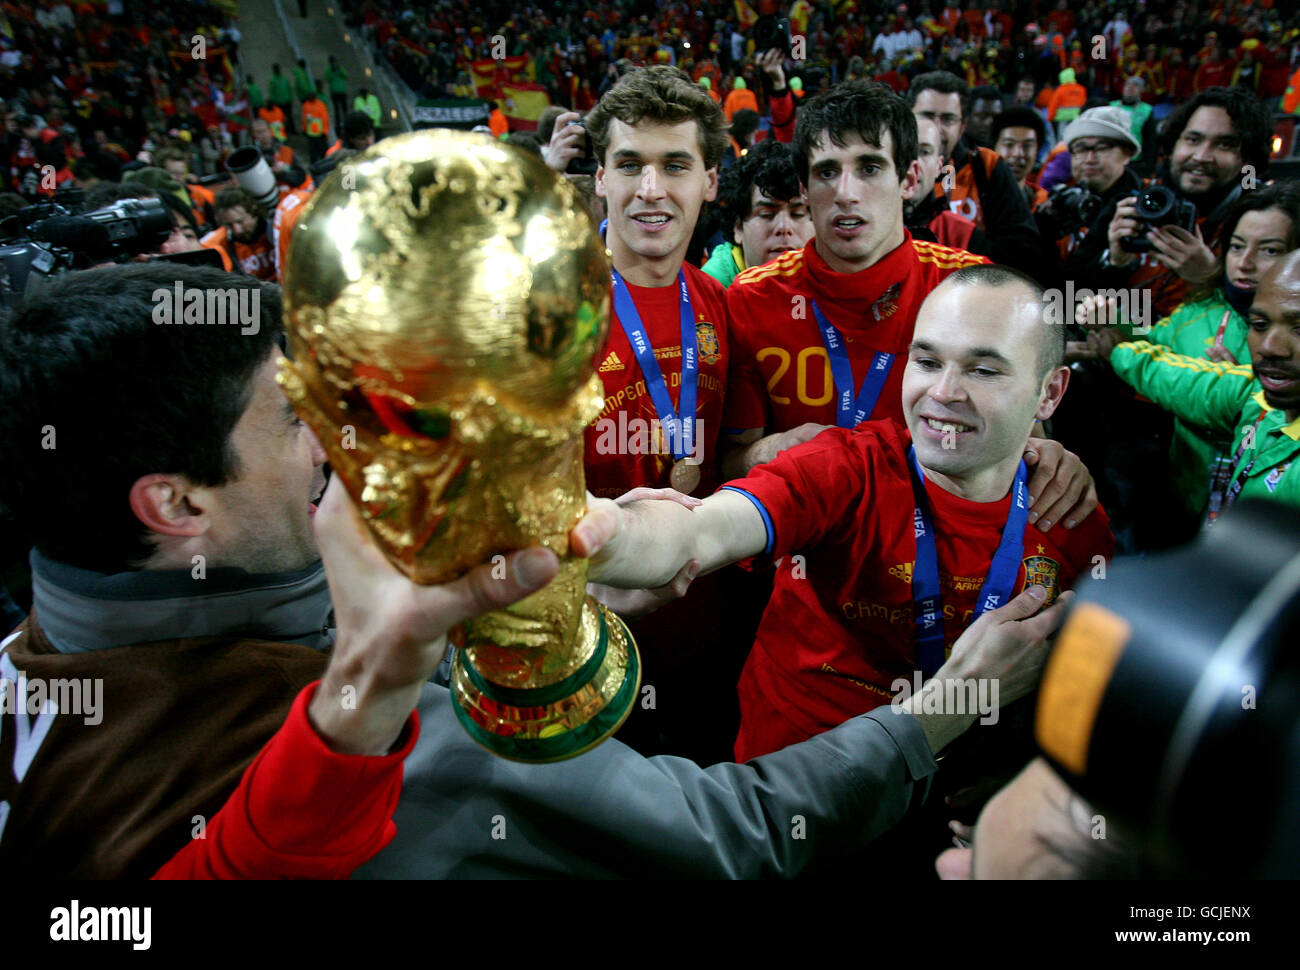 Soccer - 2010 FIFA World Cup South Africa - Final - Netherlands v Spain - Soccer City Stadium. Spain's Andres Iniesta celebrates with the World Cup trophy after winning against Netherlands Stock Photo